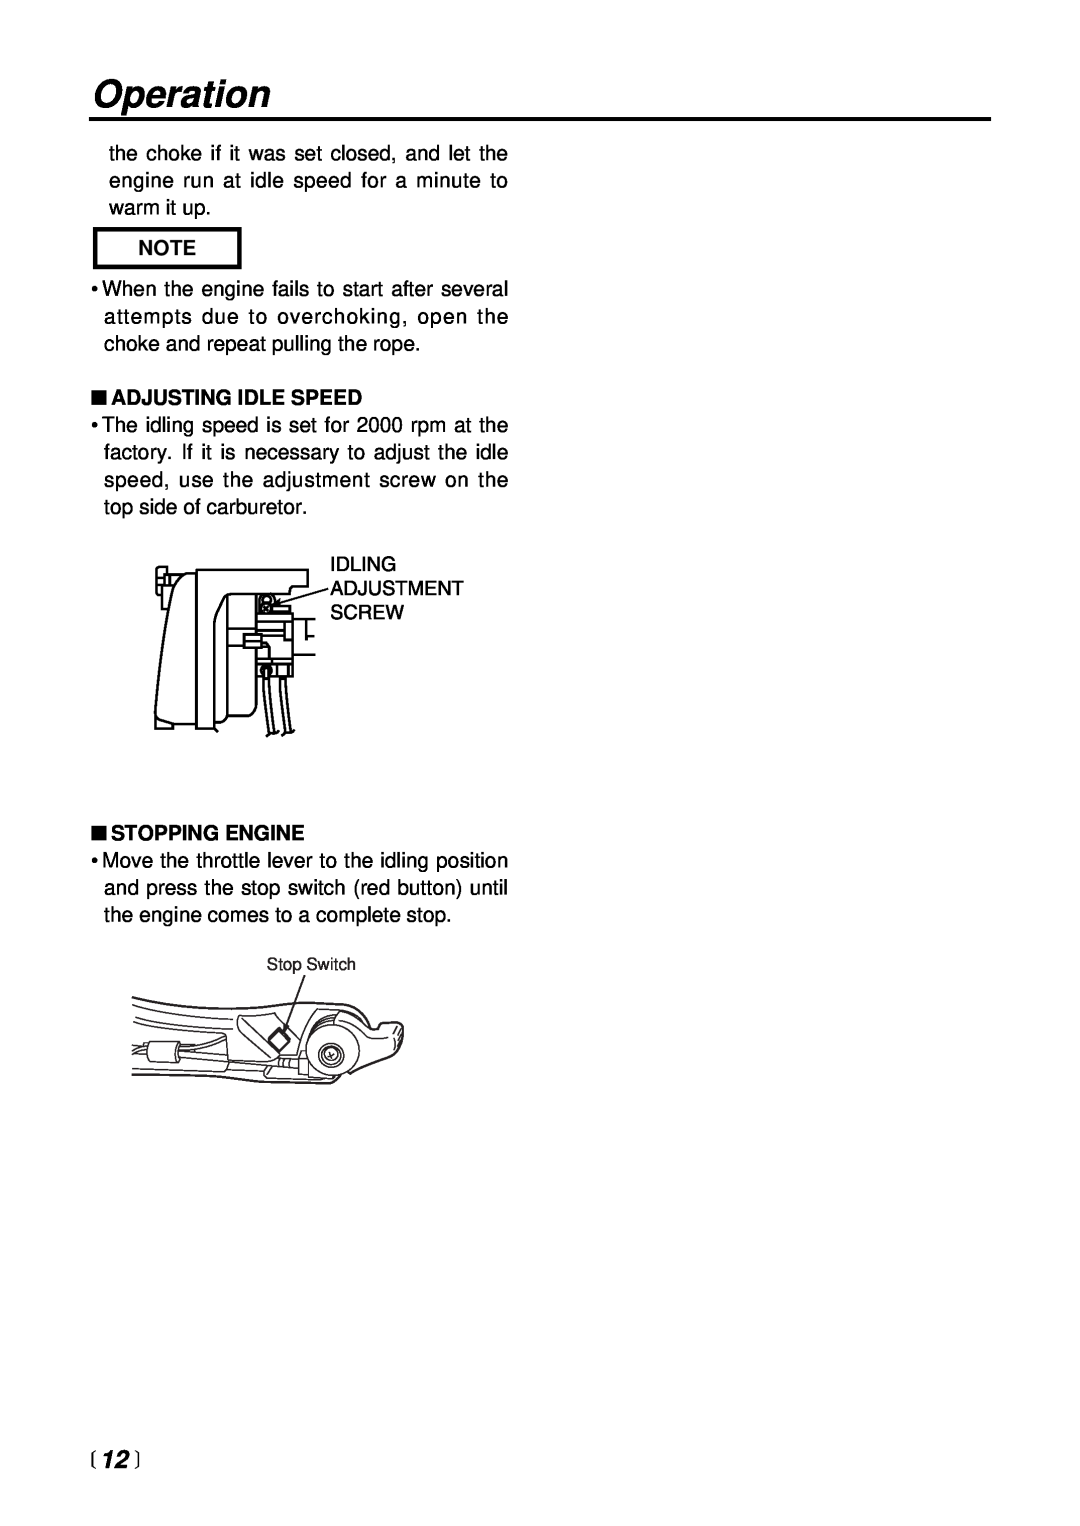 RedMax EB4400 manual Operation,  12 , Adjusting Idle Speed, Stopping Engine 